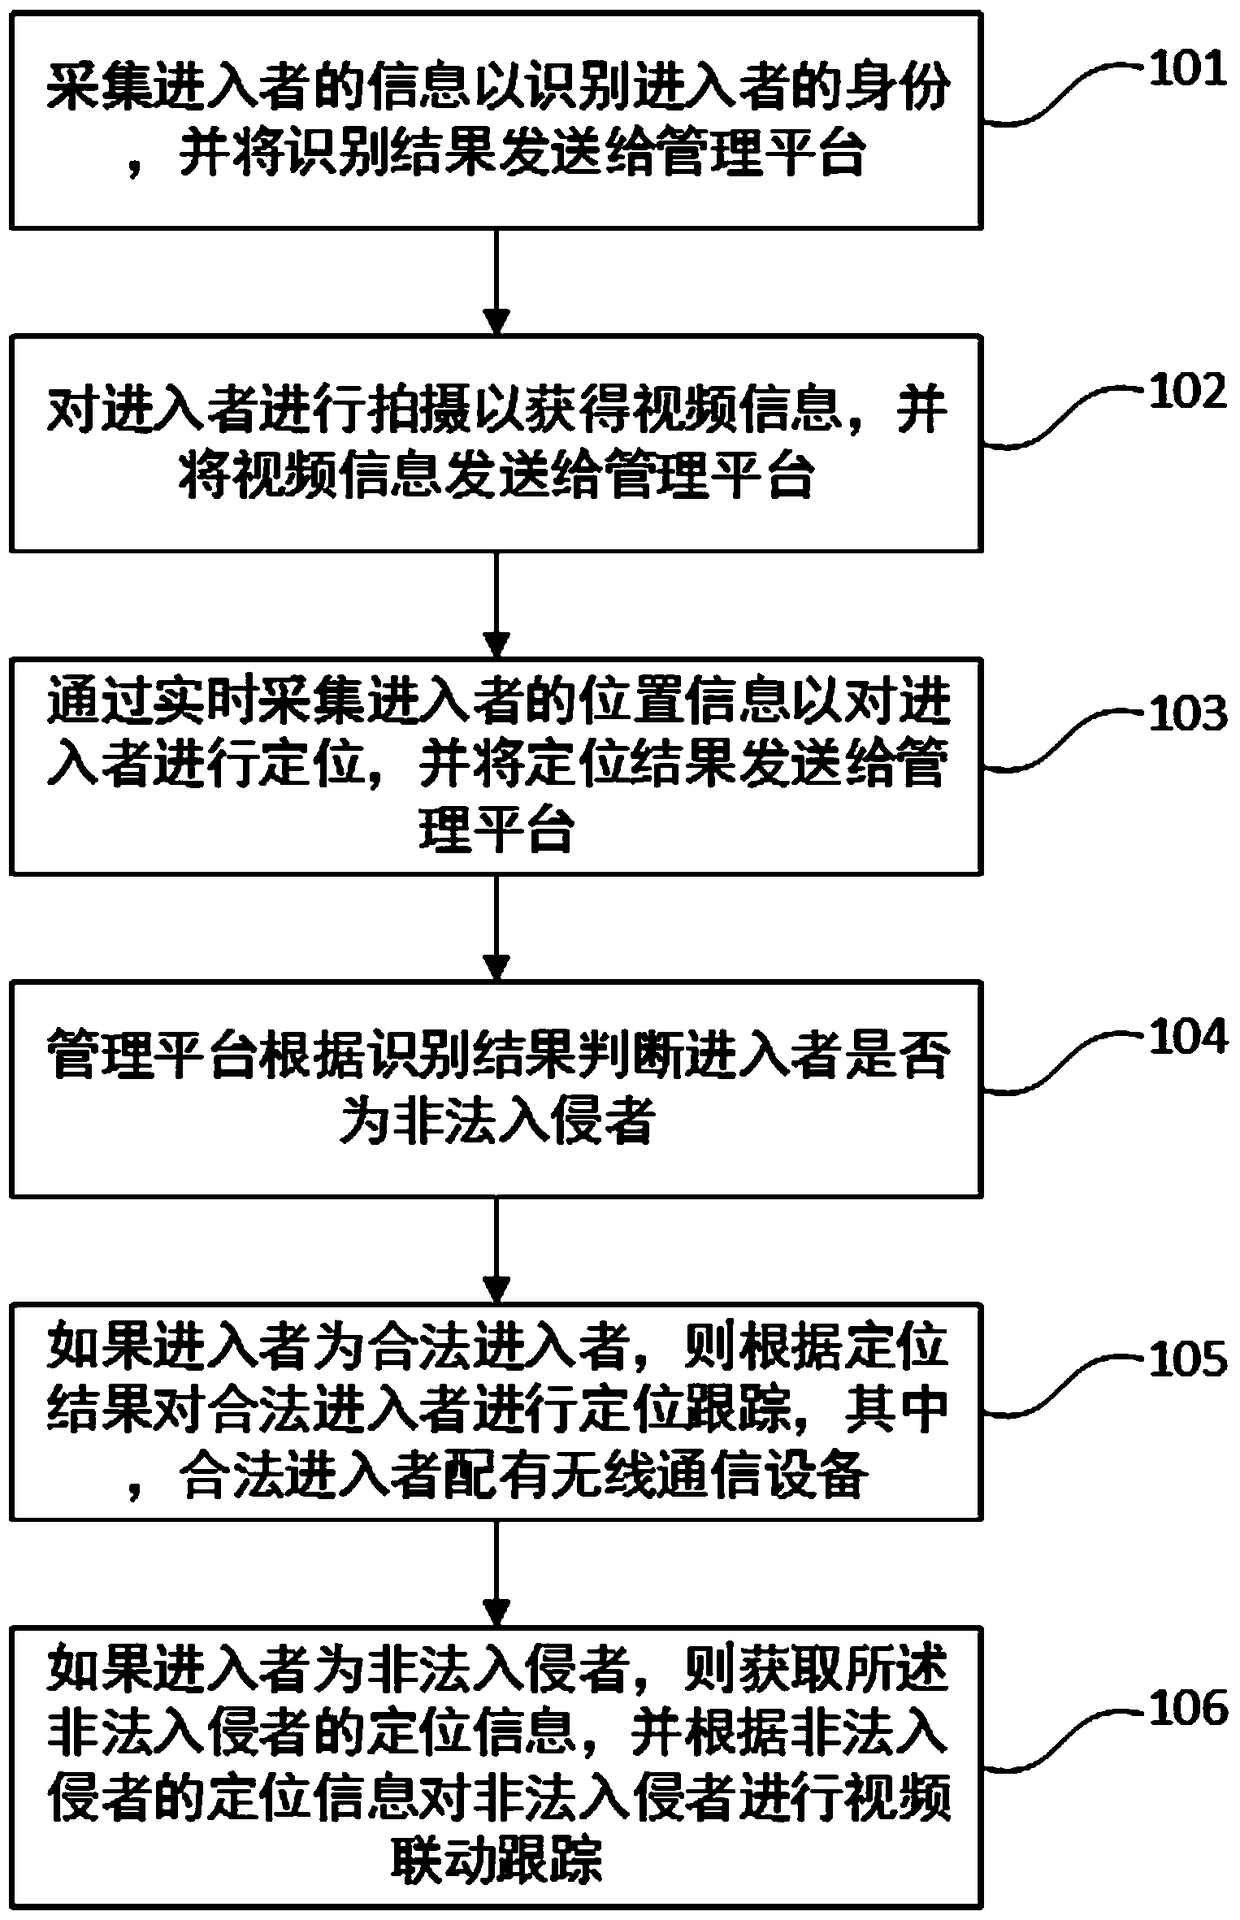 Intrusion detection tracking system and method